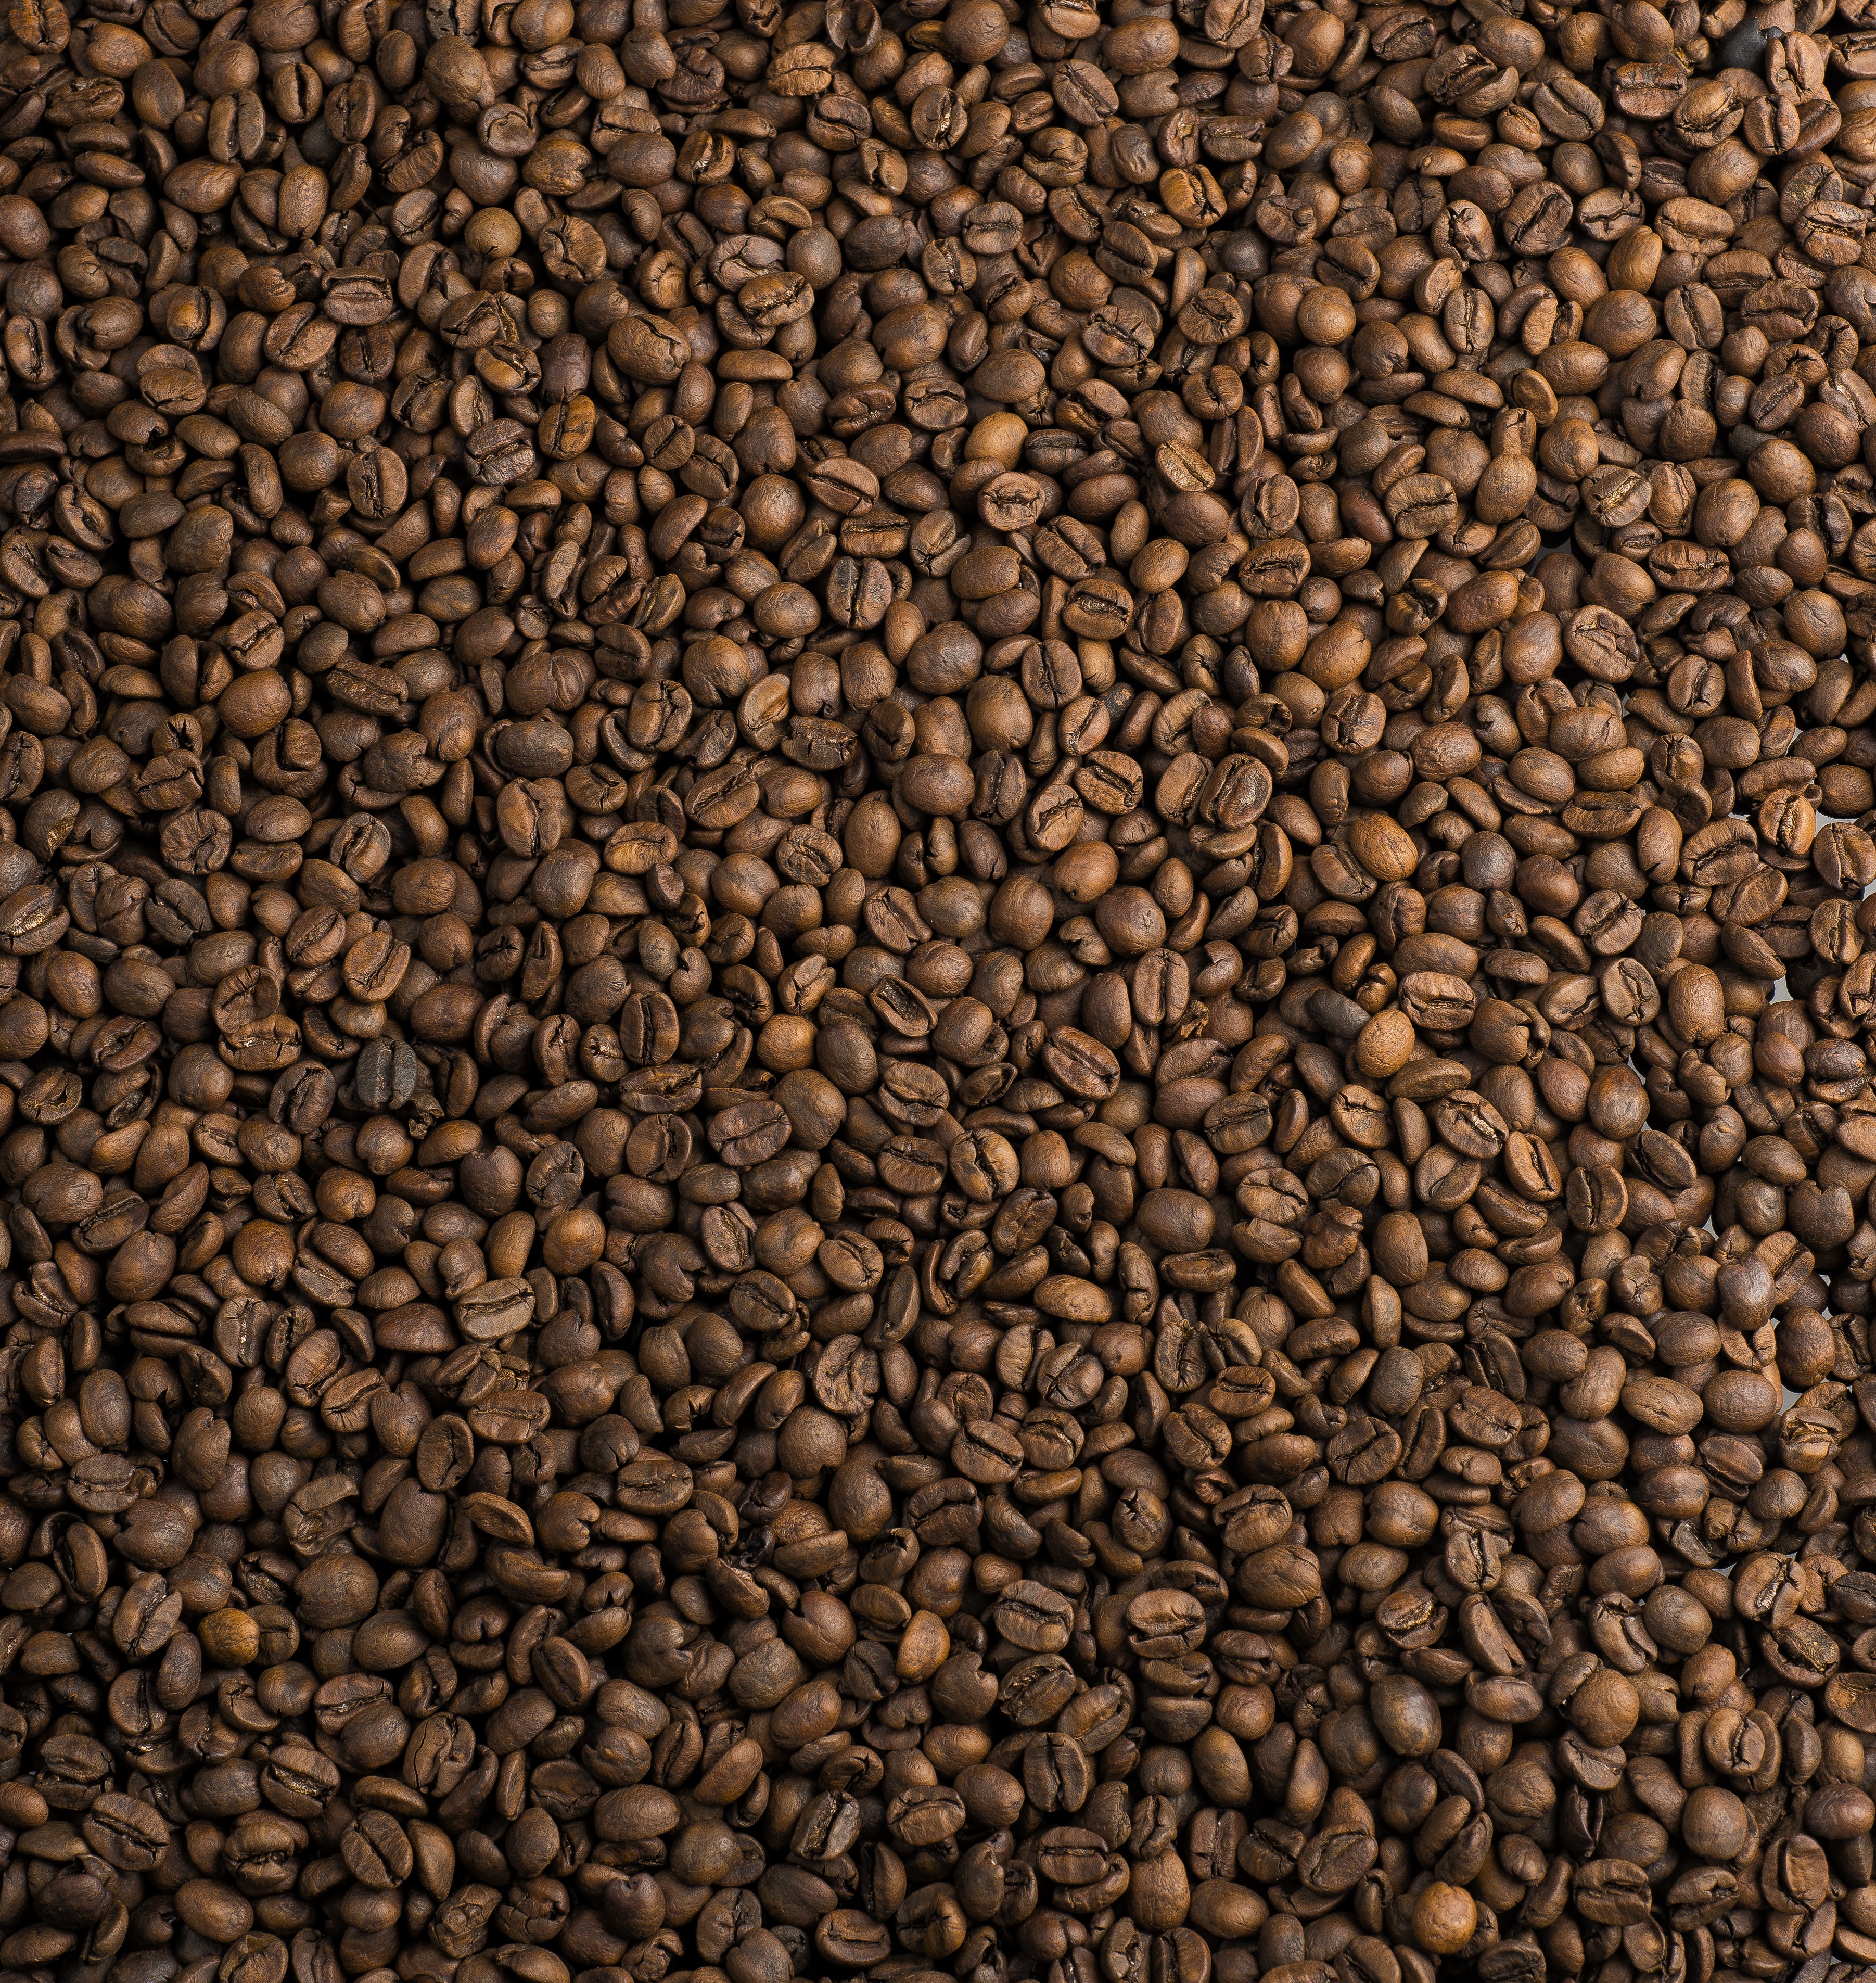 textures, café, coffee, texture, coffee beans, fried, roasted, coffee house